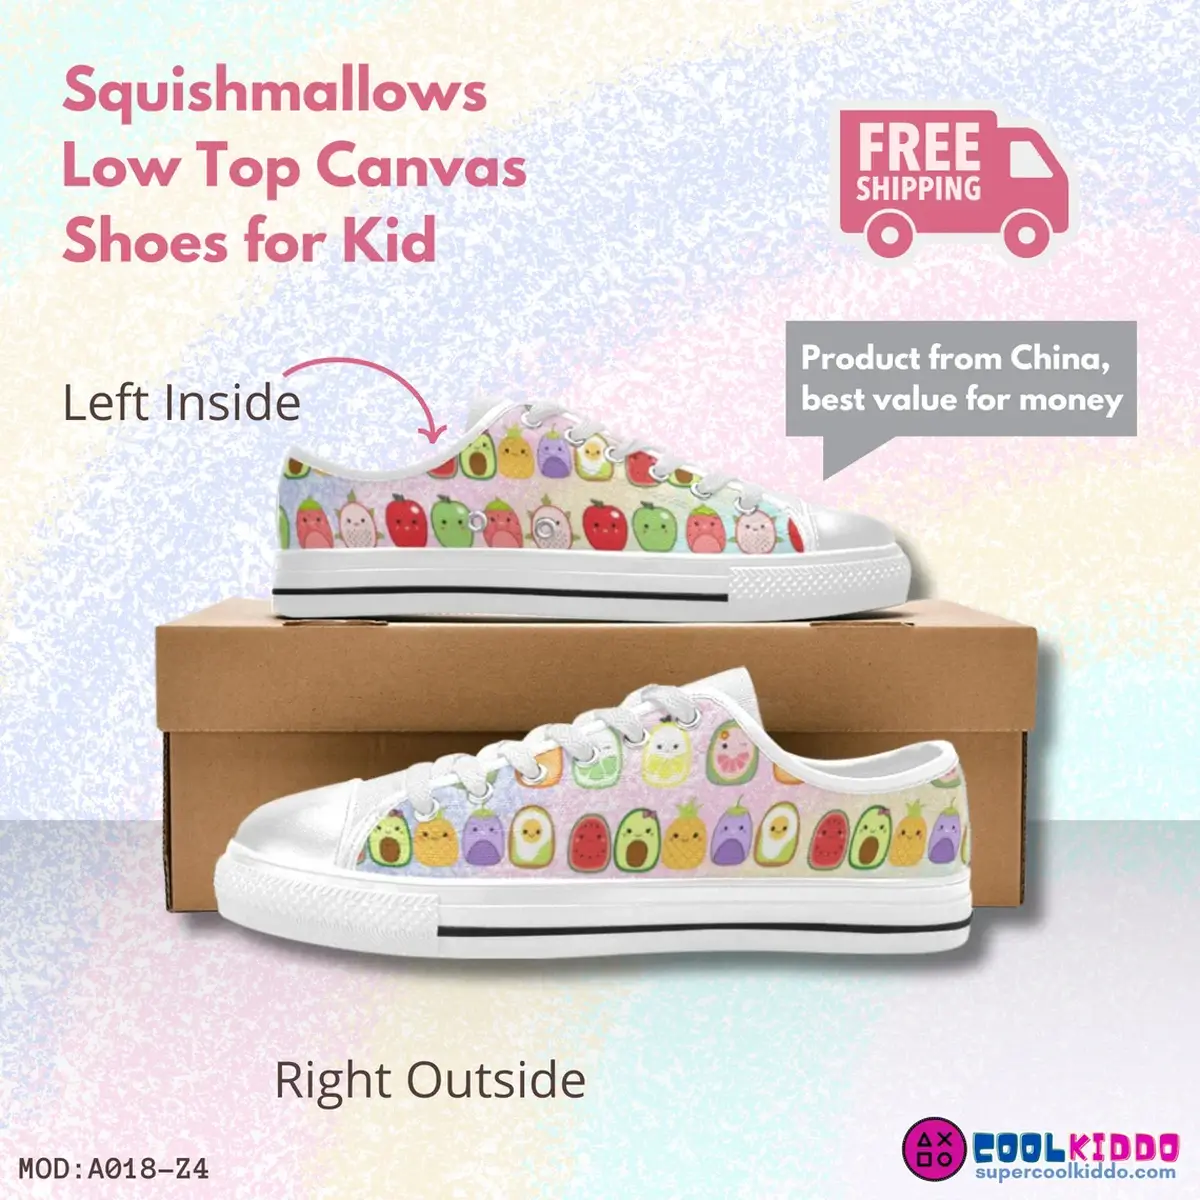 Squishmallow food shoes for kids squishmallow, Low top canvas shoes for kids Cool Kiddo 14